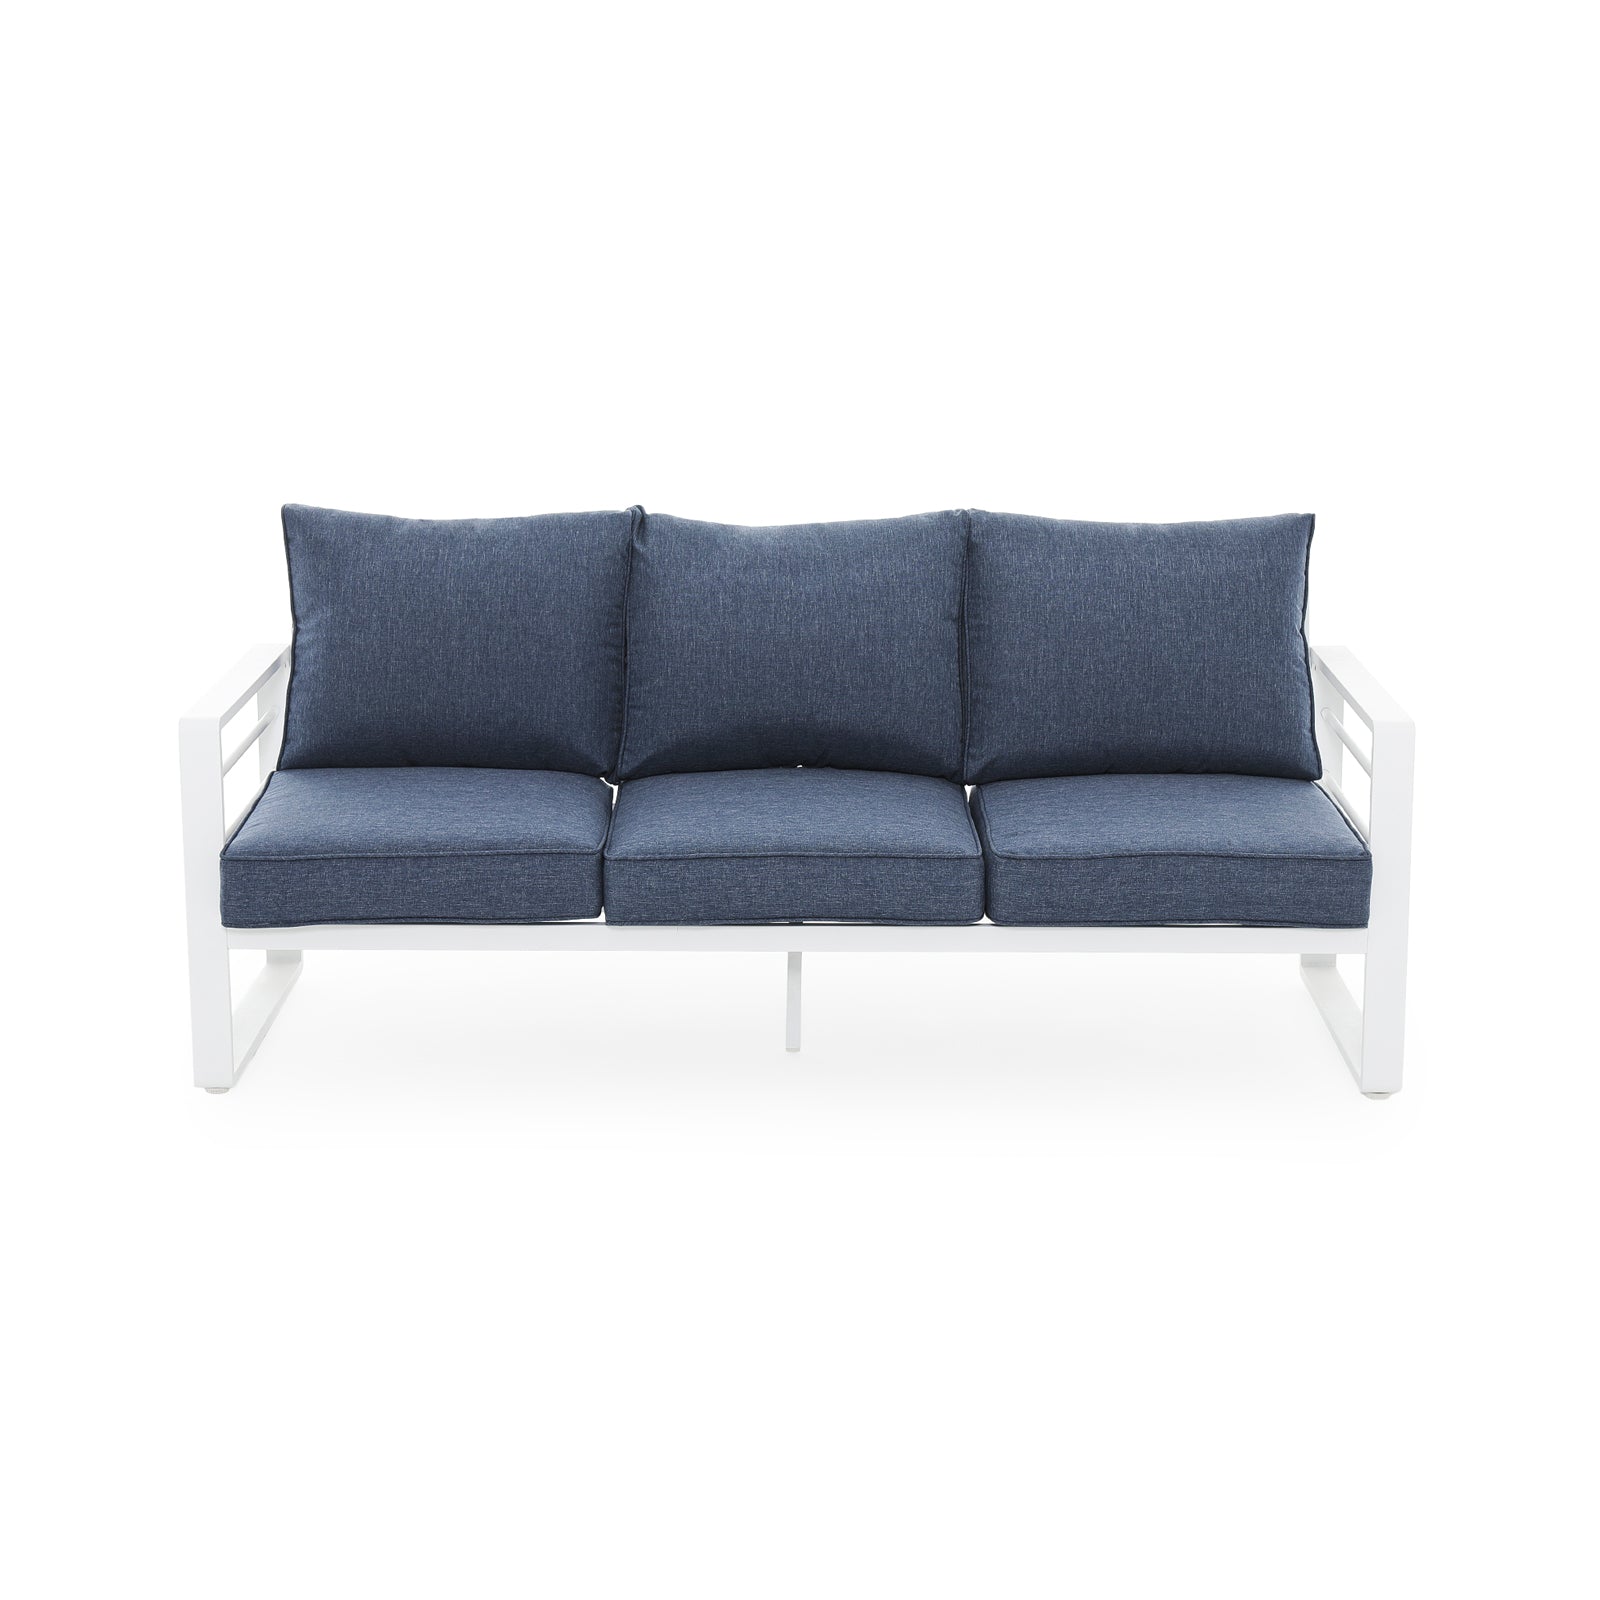 Salina 3-Seater White Aluminum Outdoor Couch with Navy Blue Cushions - Jardina Furniture